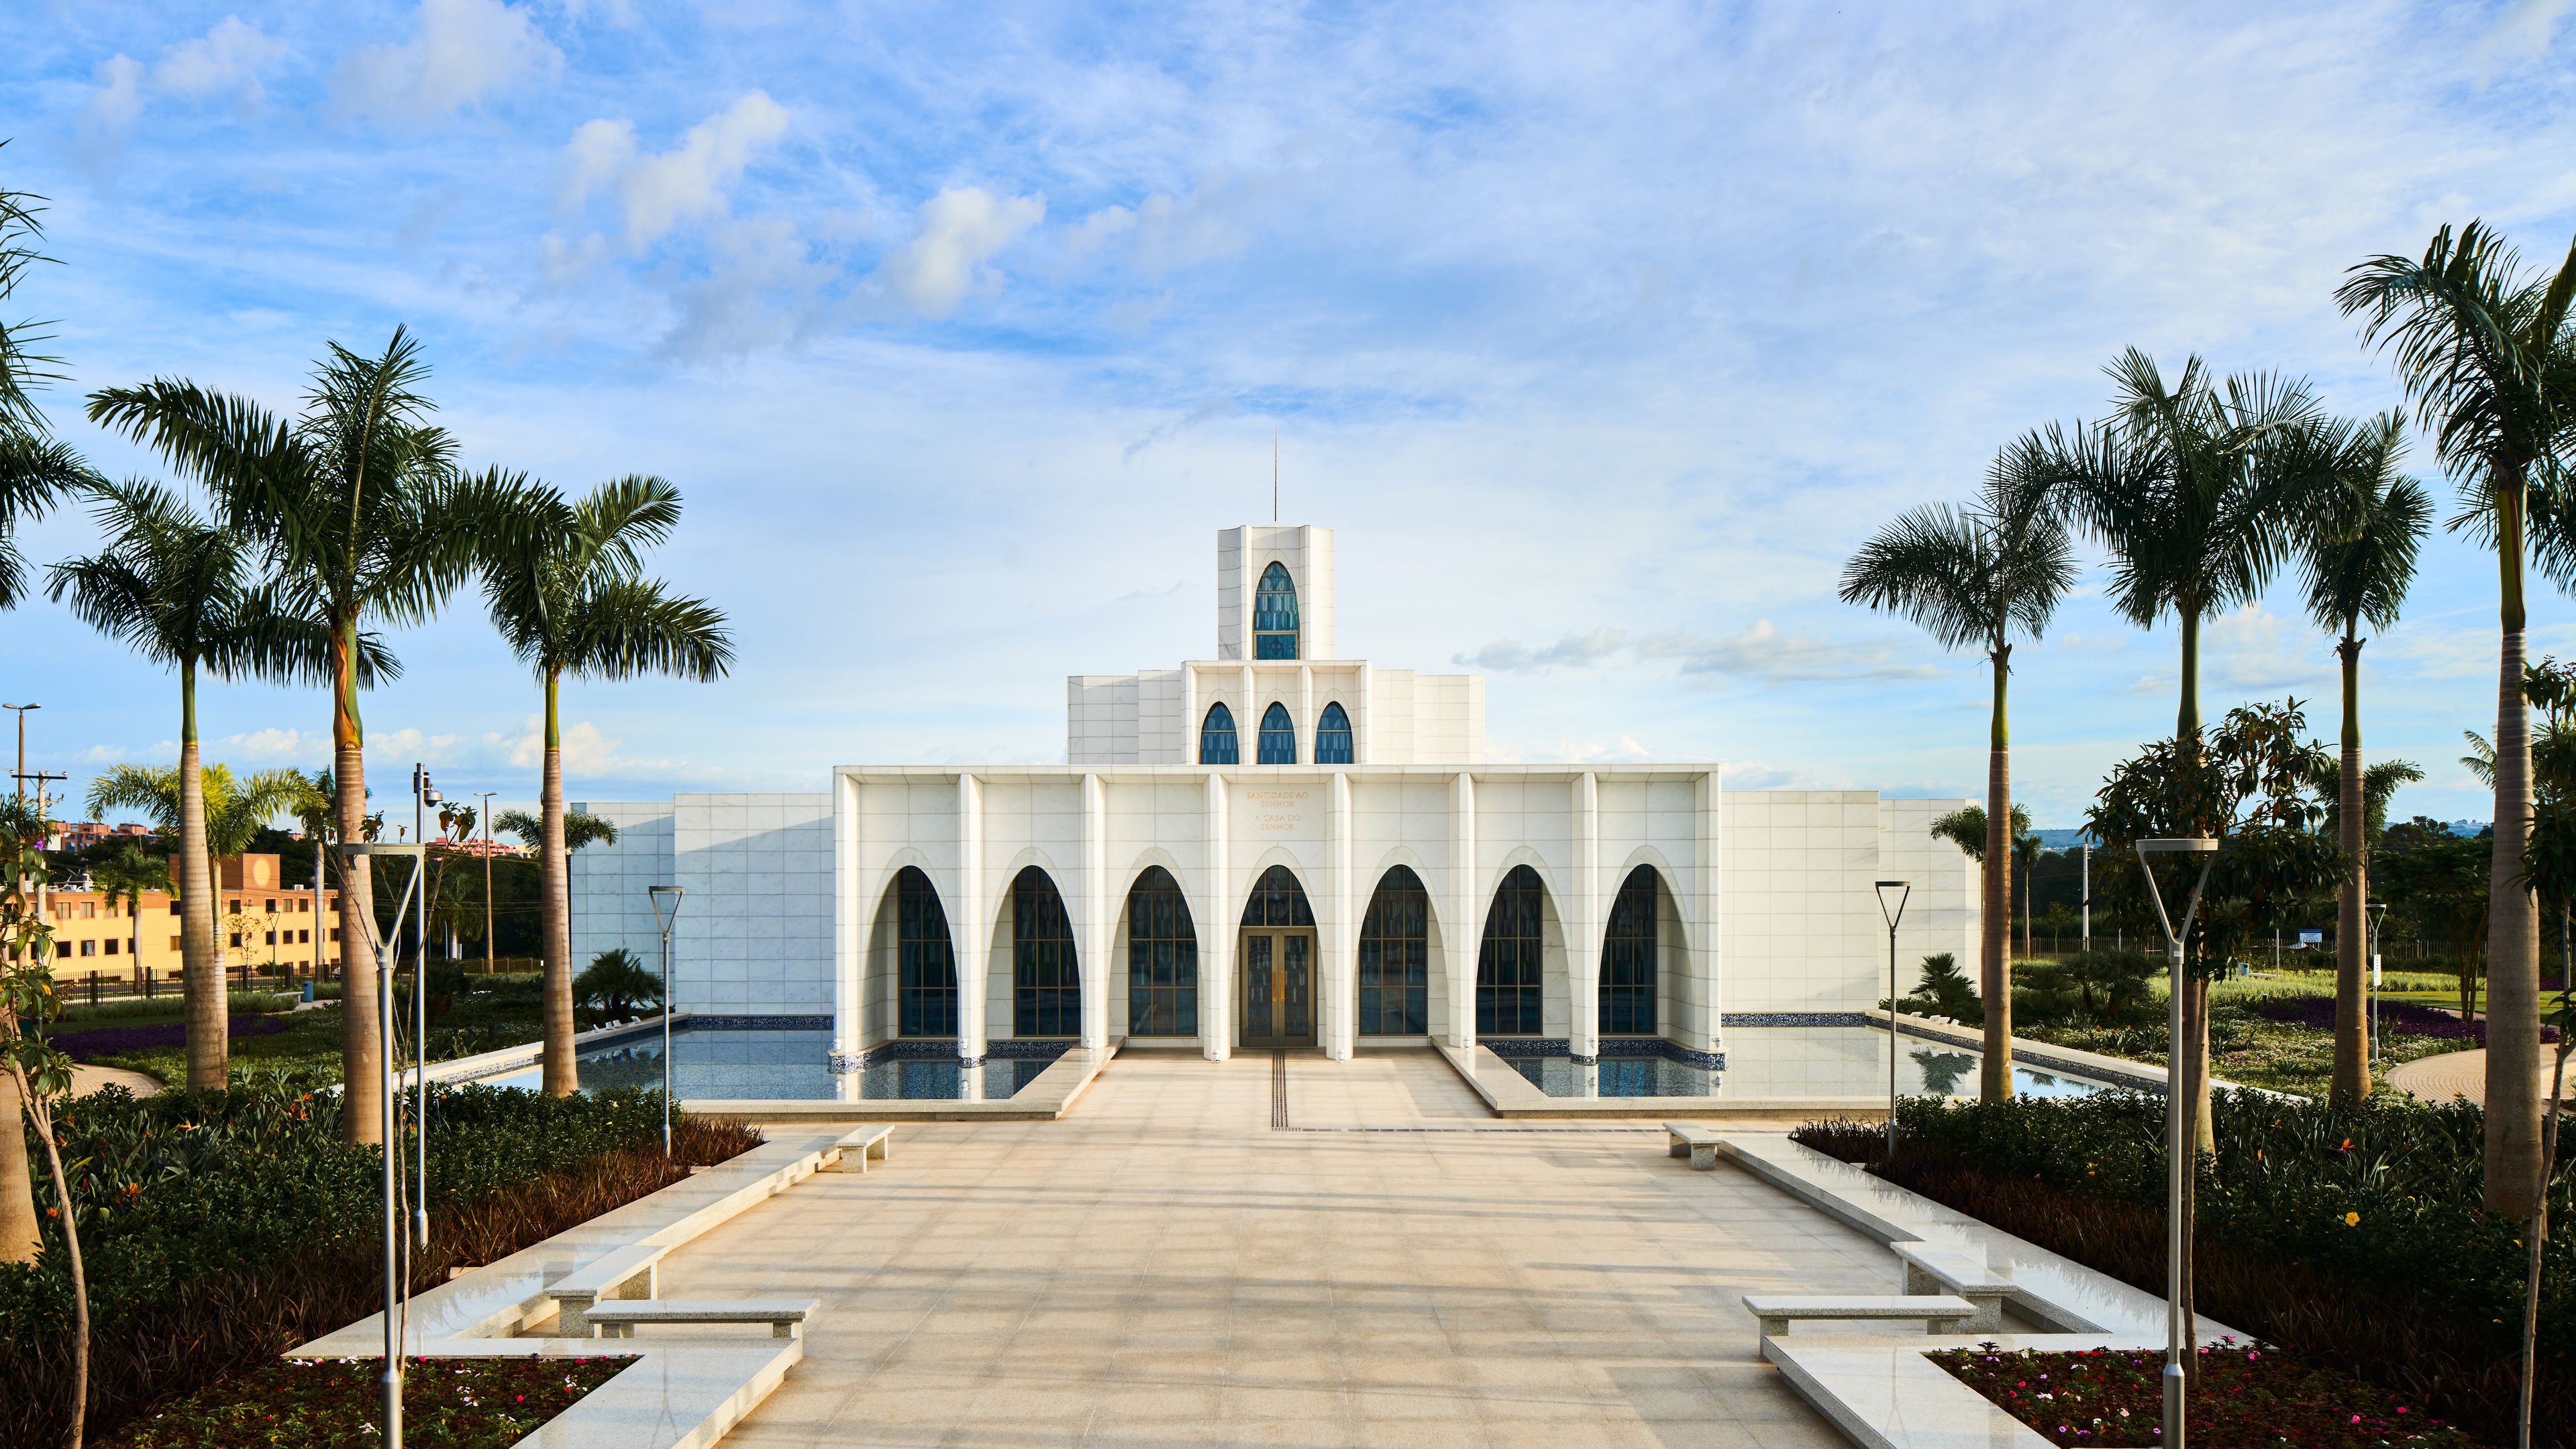 Exterior of the Brasilia Brazil Temple. It features the front of the temple, the entrance area, and trees nearby. Image was taken during the day.